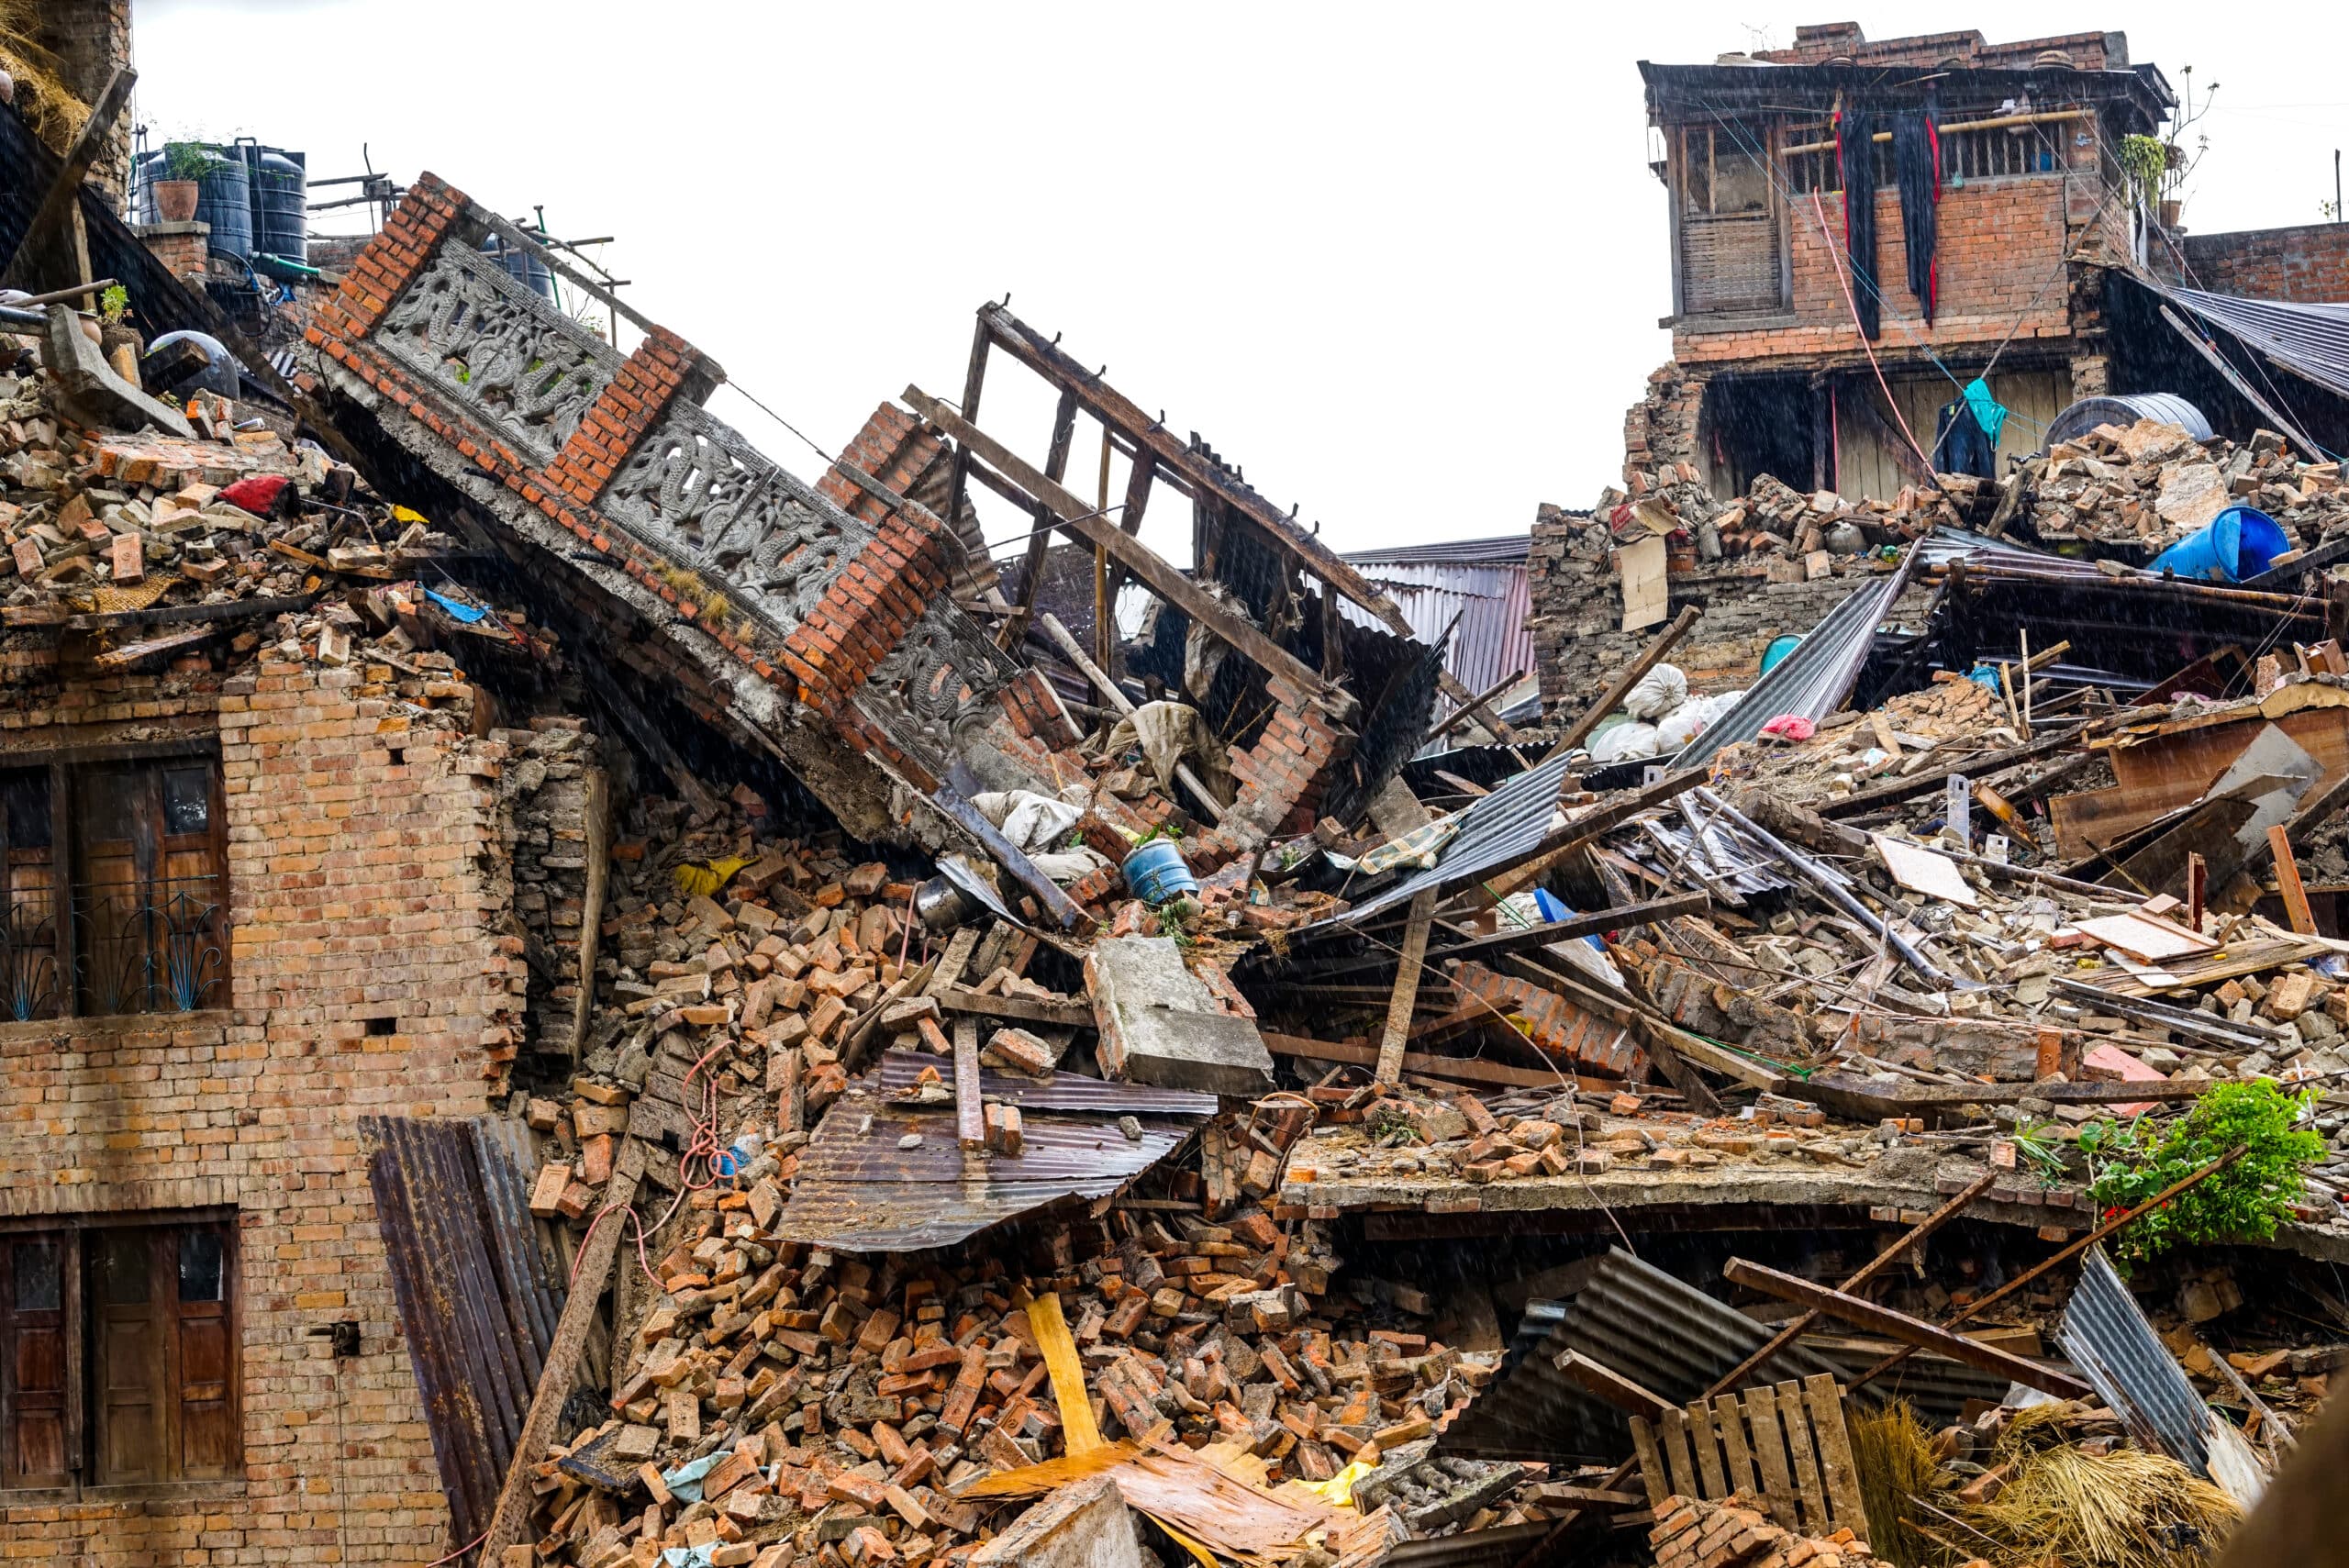 Bhakatapur Nepal April 28 2015, A Partially Collapsed Building